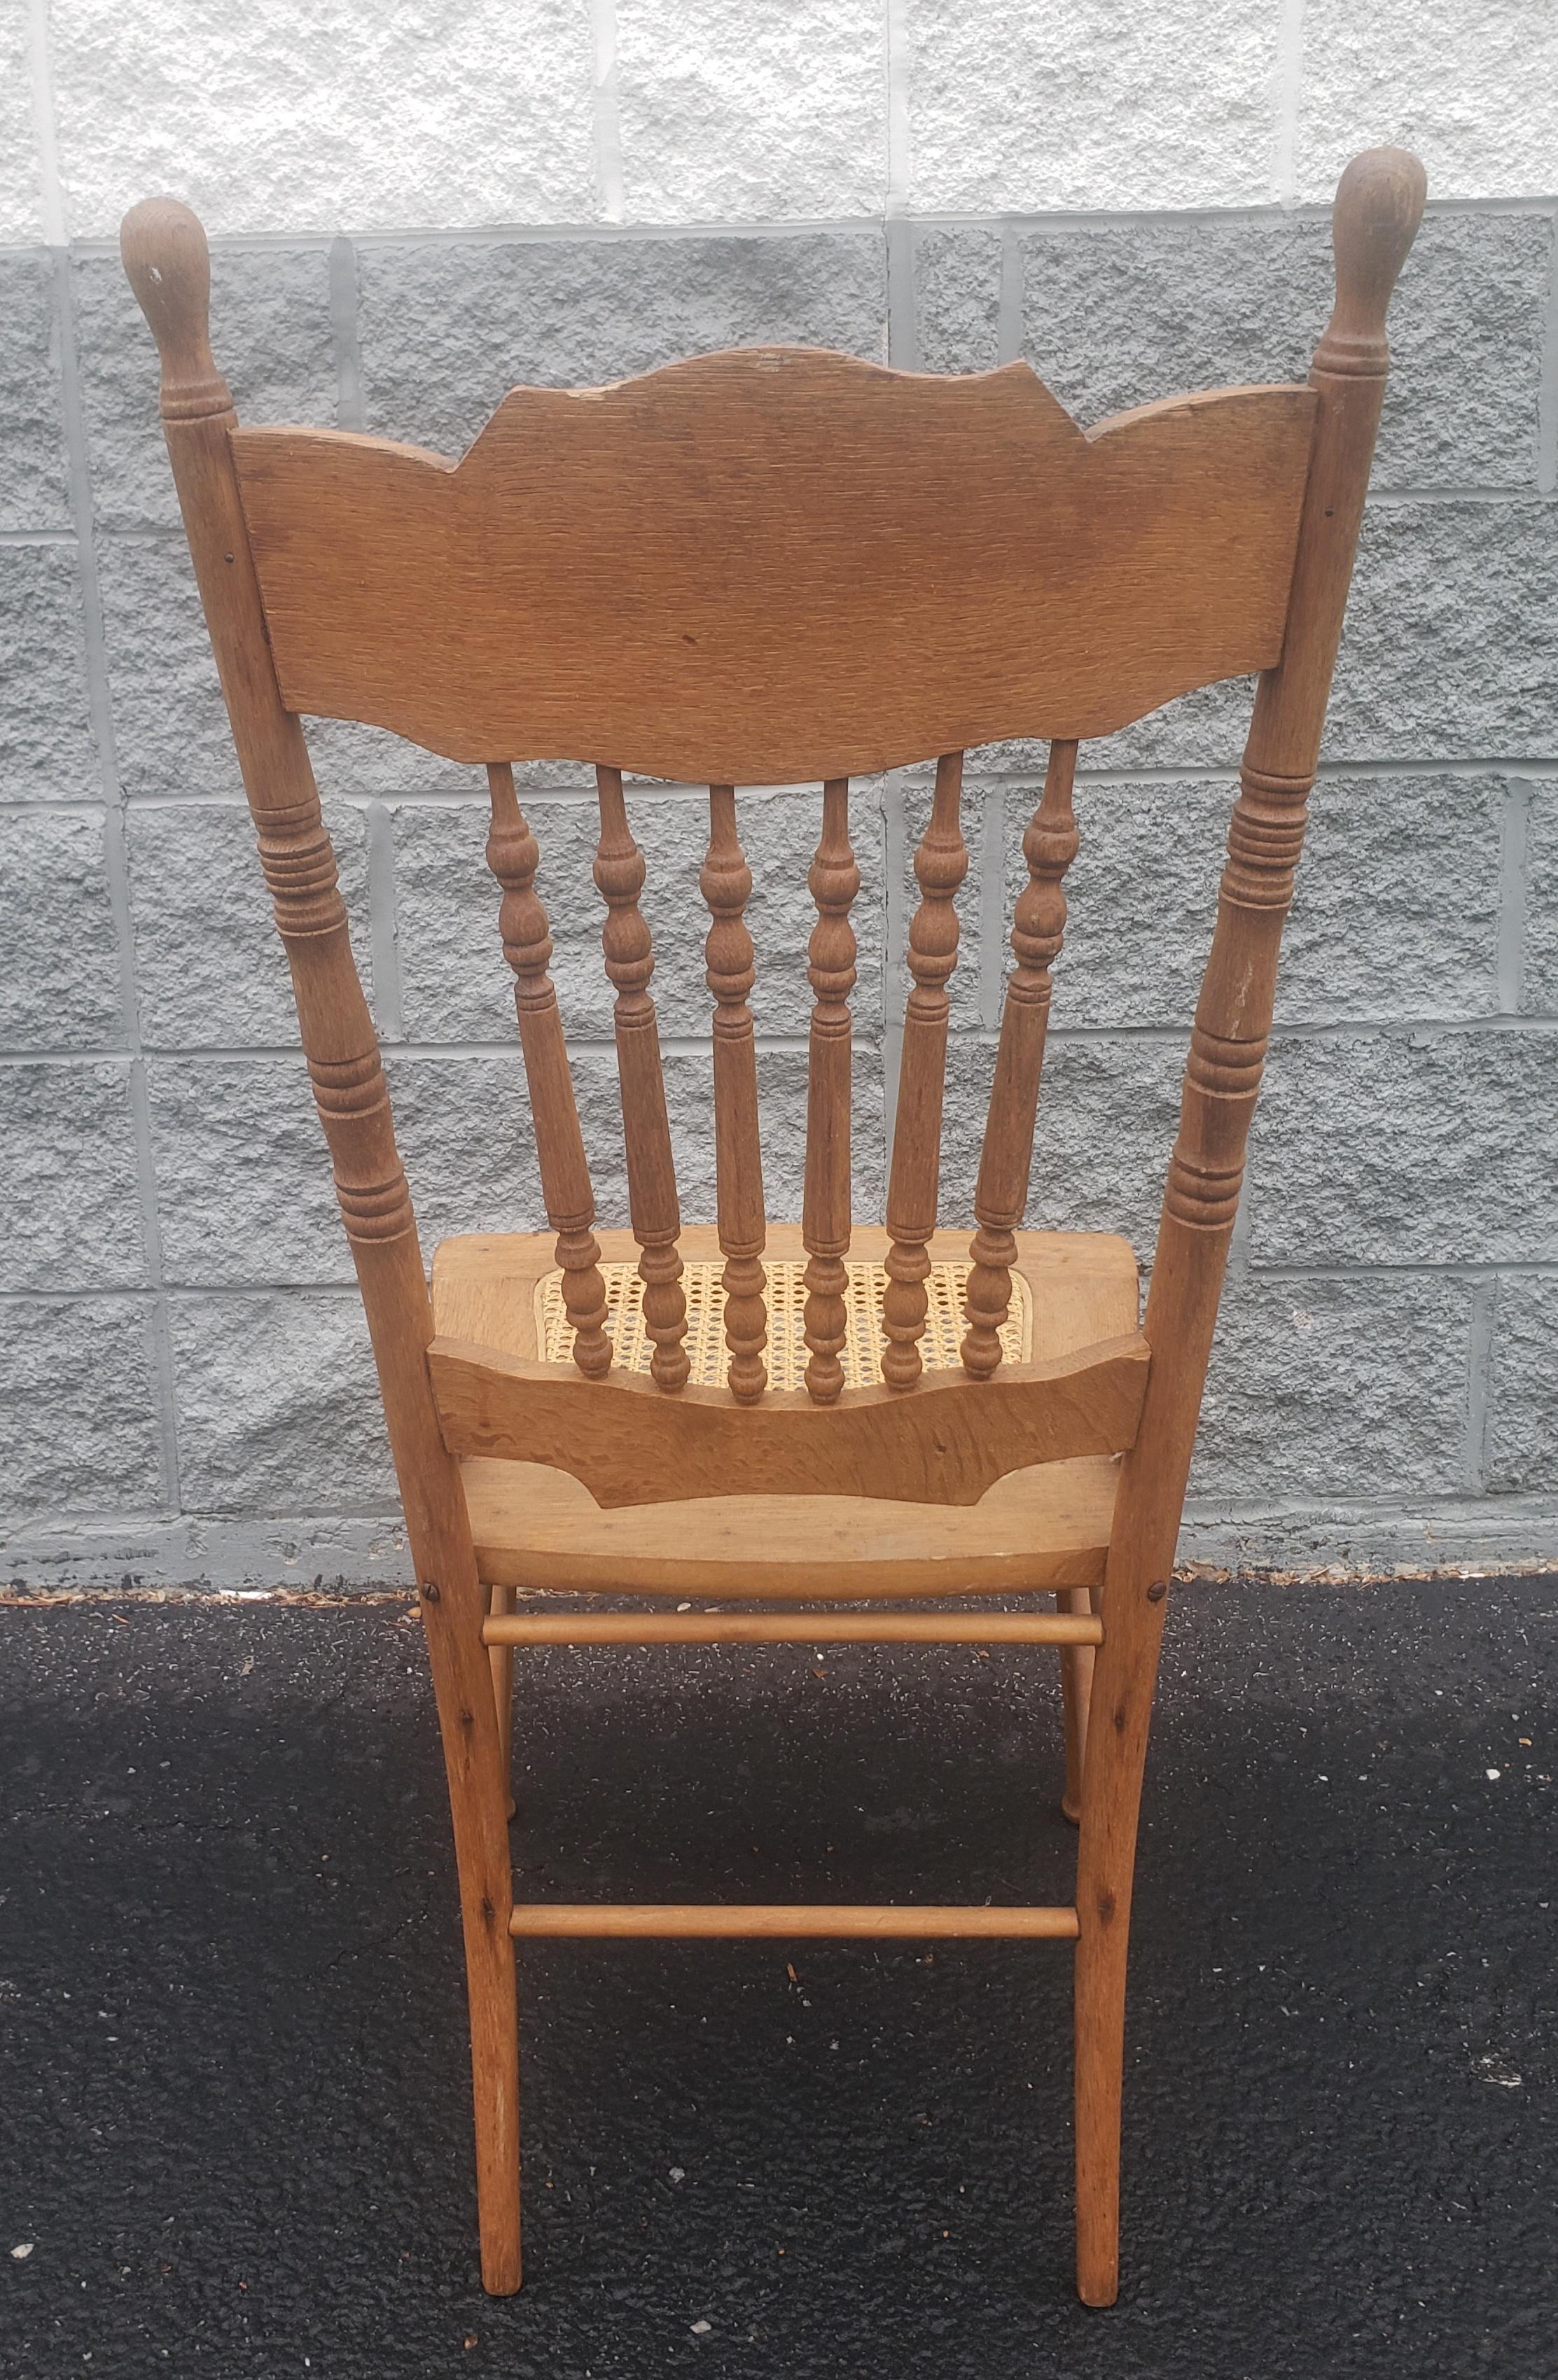 pressback chairs for sale